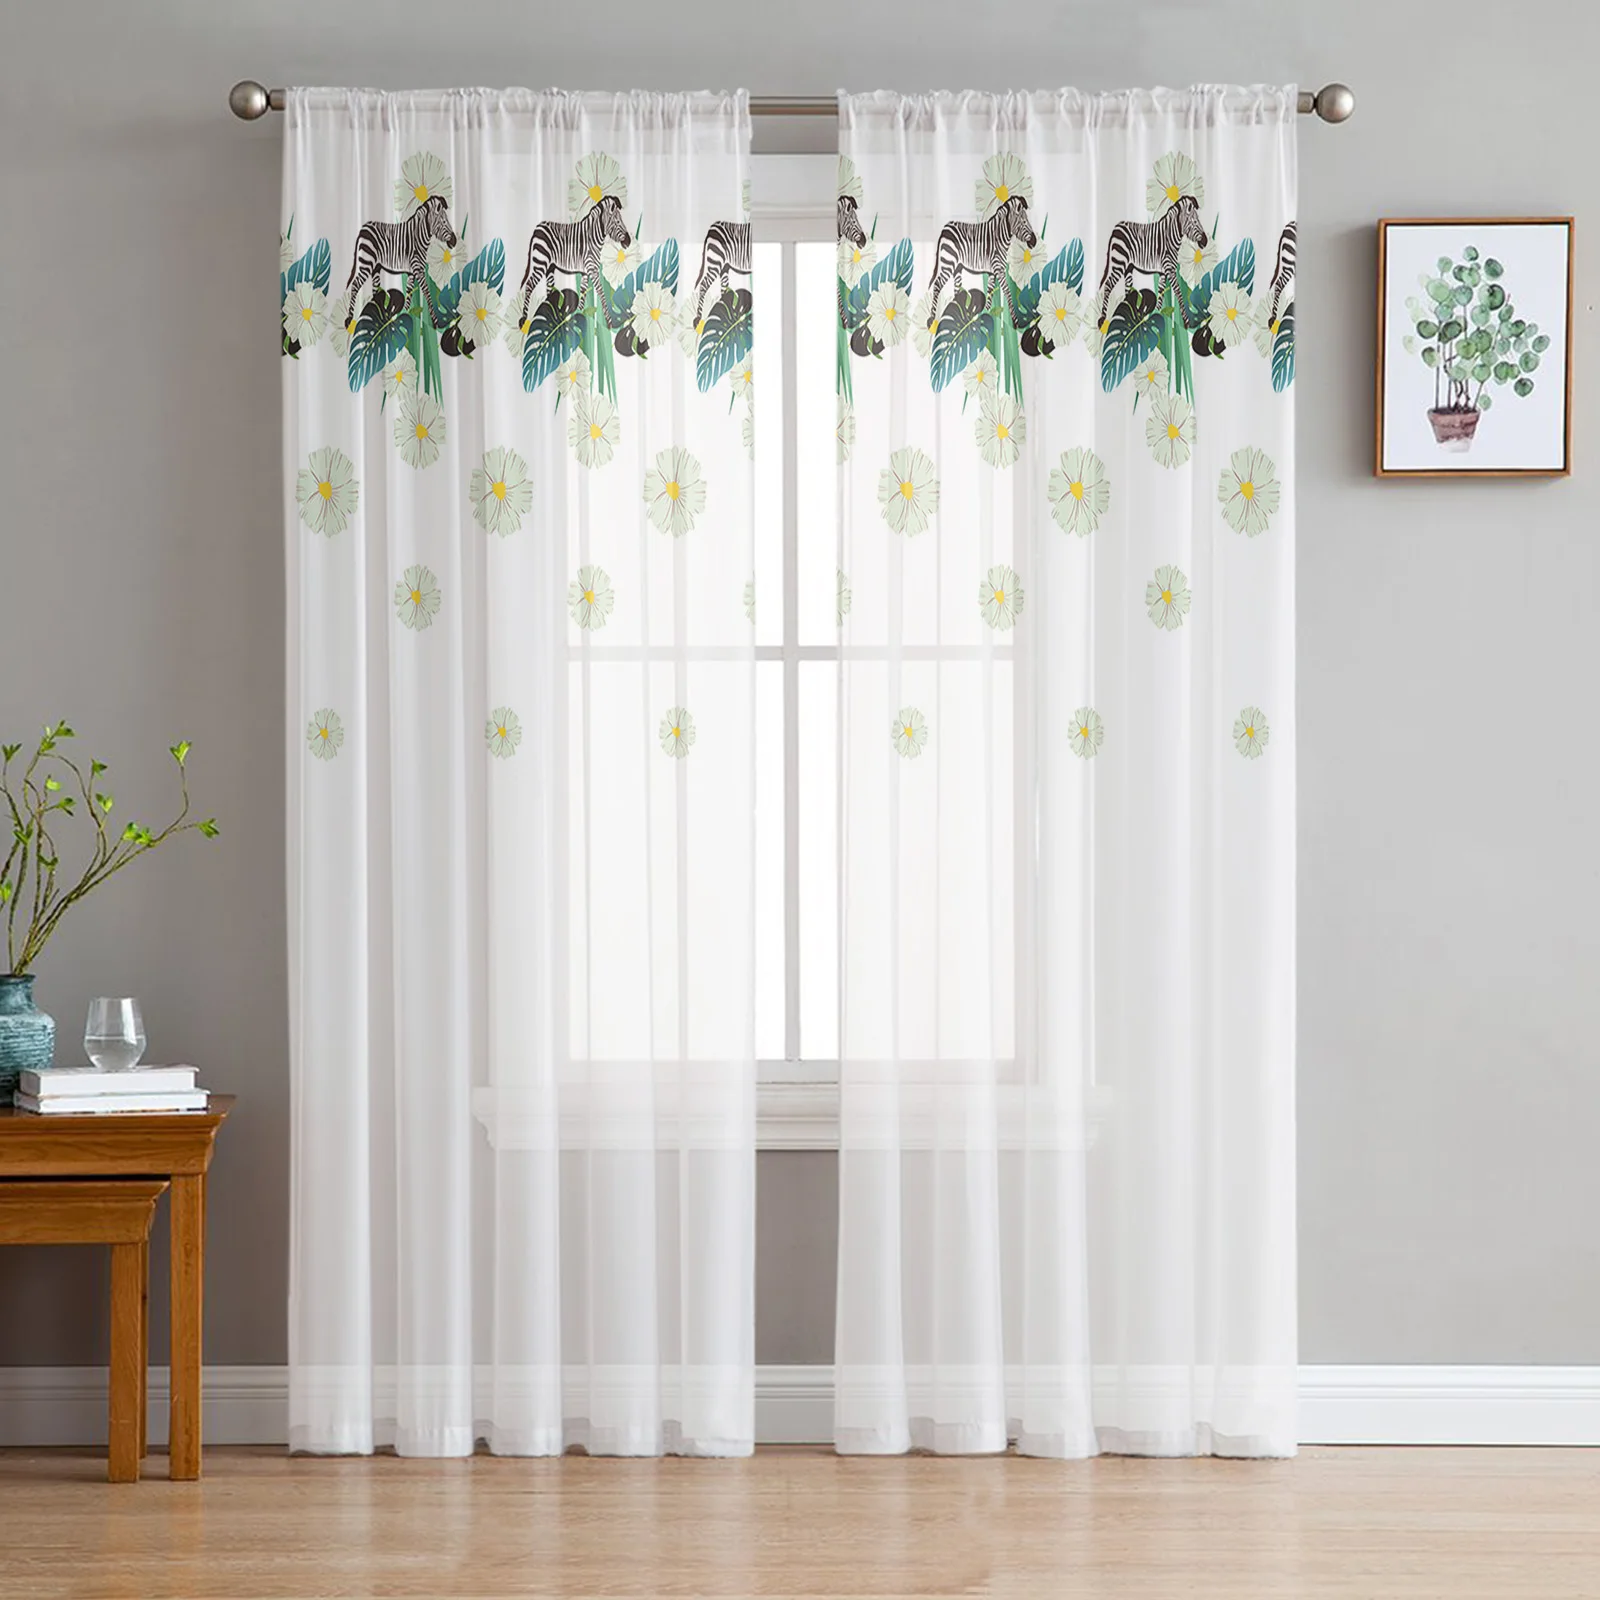 

Zebra Tropical Plant Flower Tulle Sheer Window Curtains for Living Room the Bedroom Voile Organza Decorative Curtains Drapes